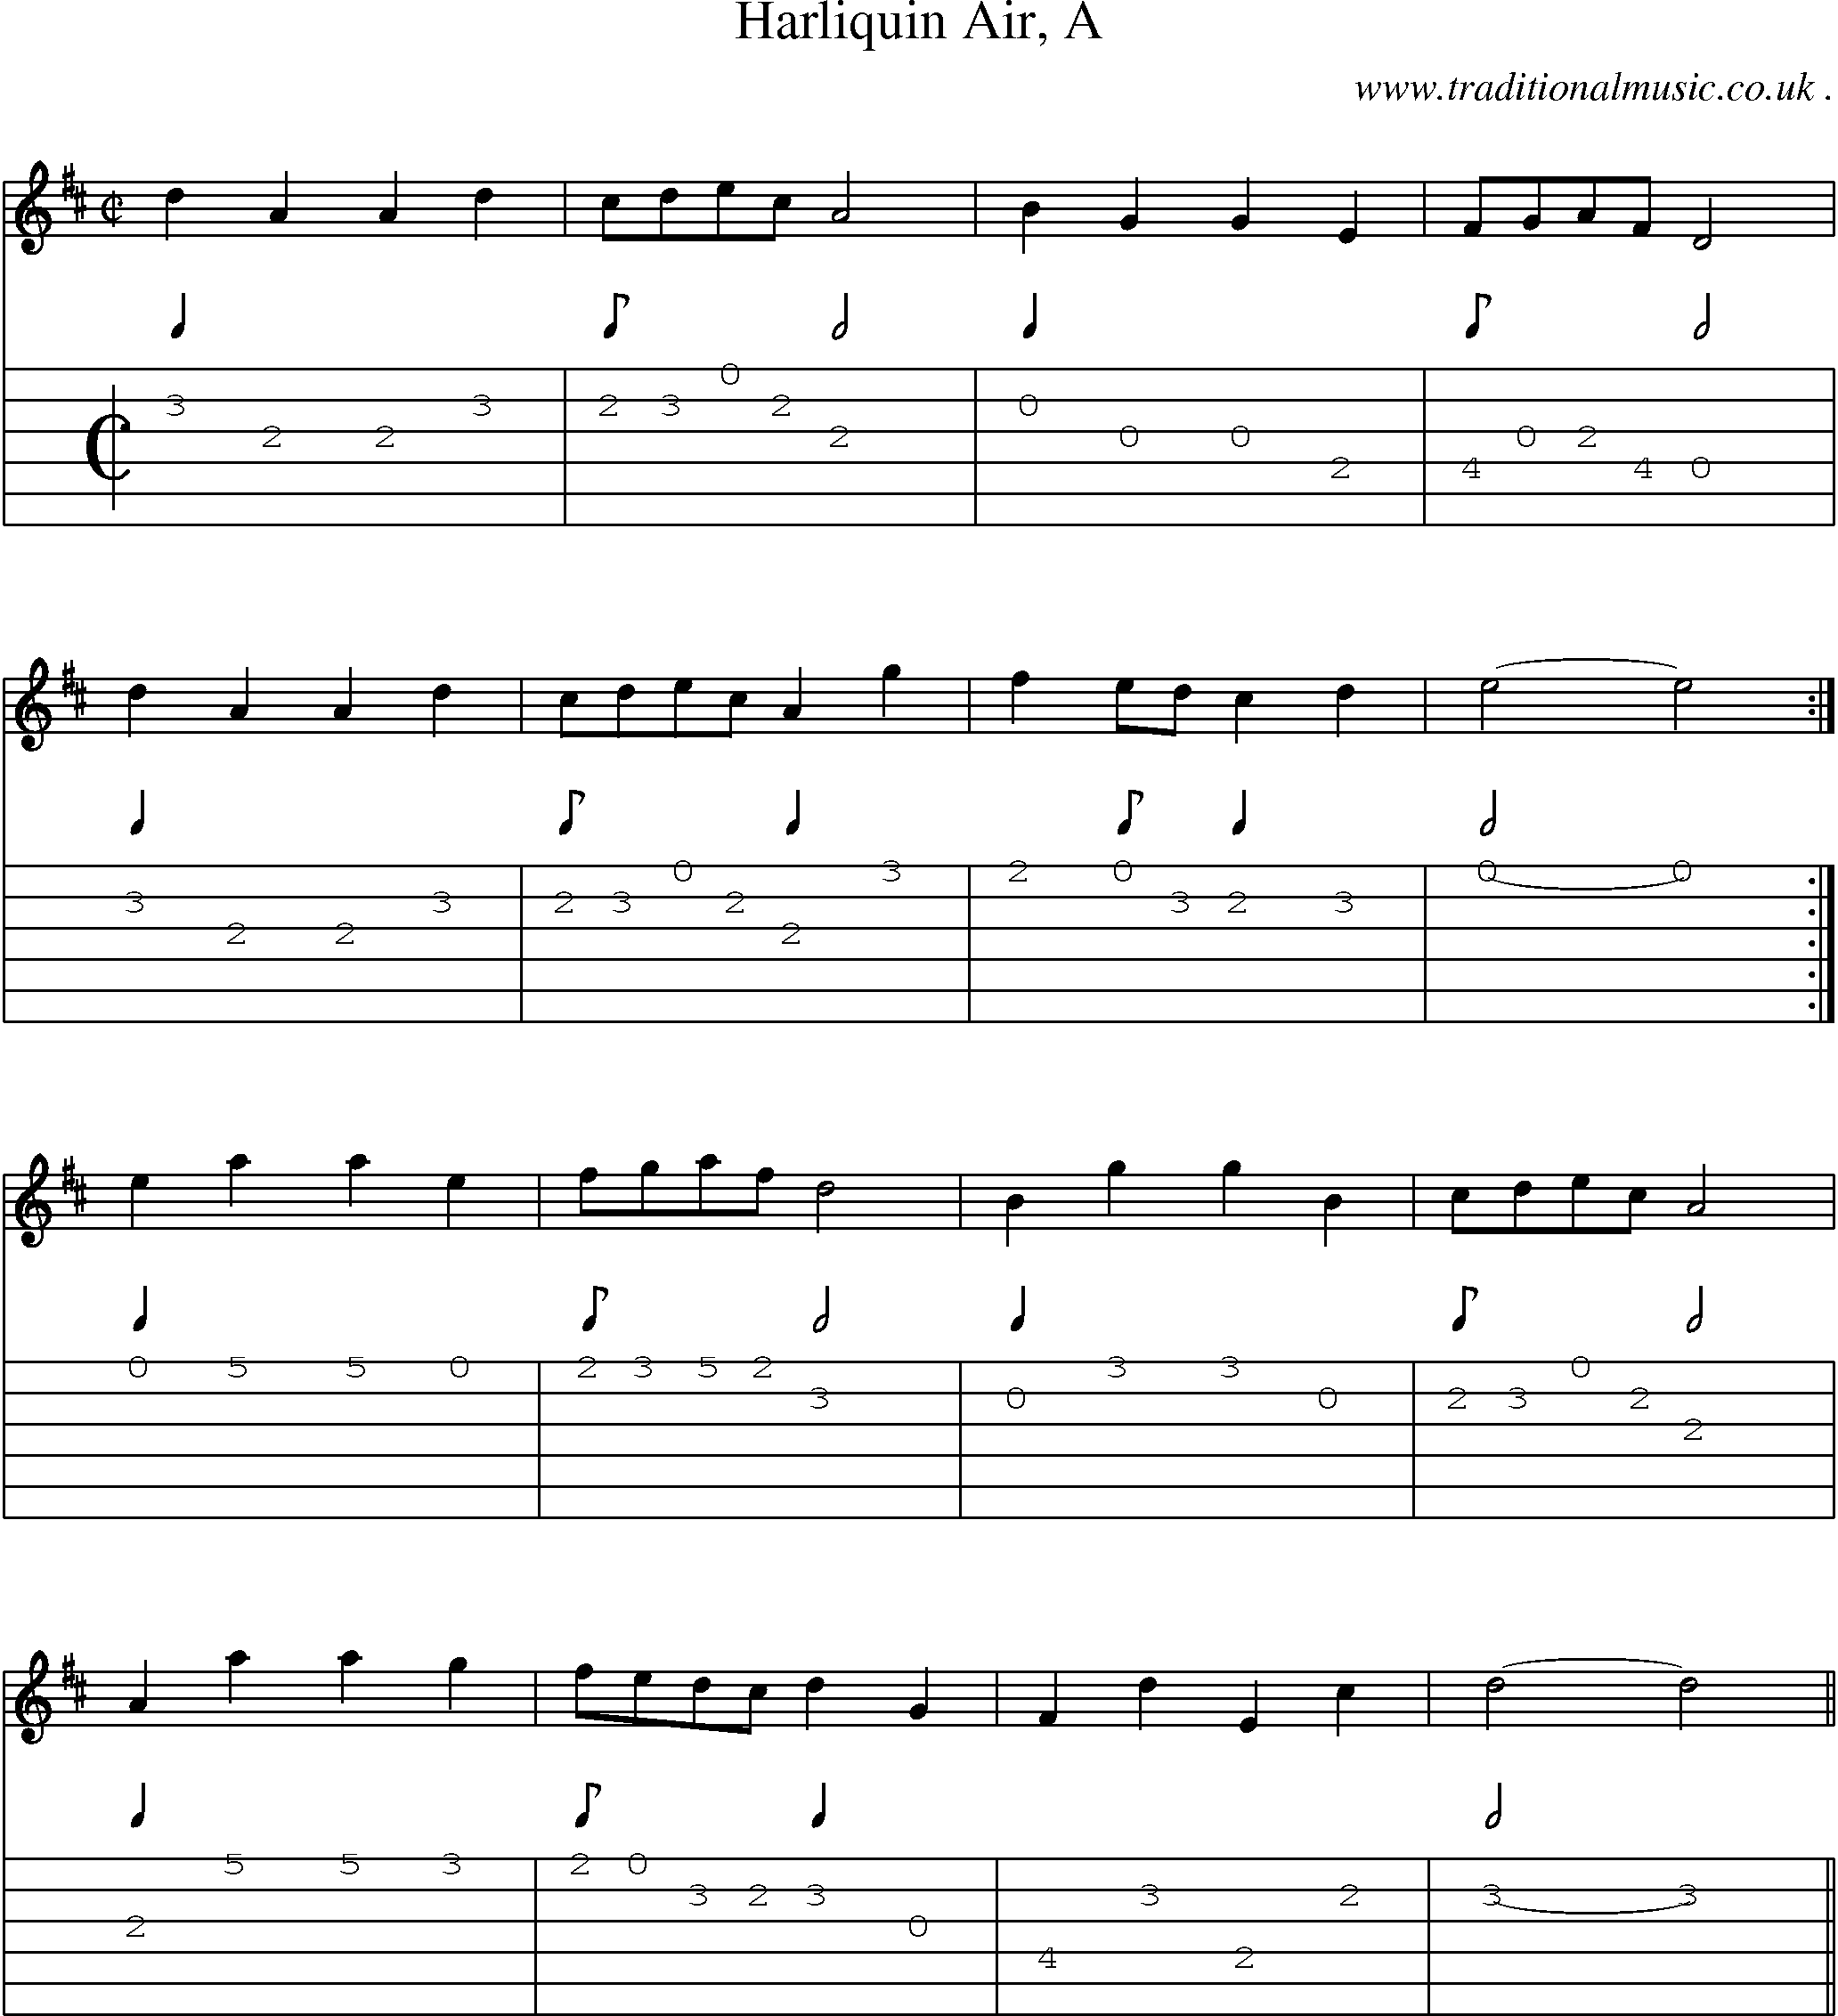 Sheet-Music and Guitar Tabs for Harliquin Air A